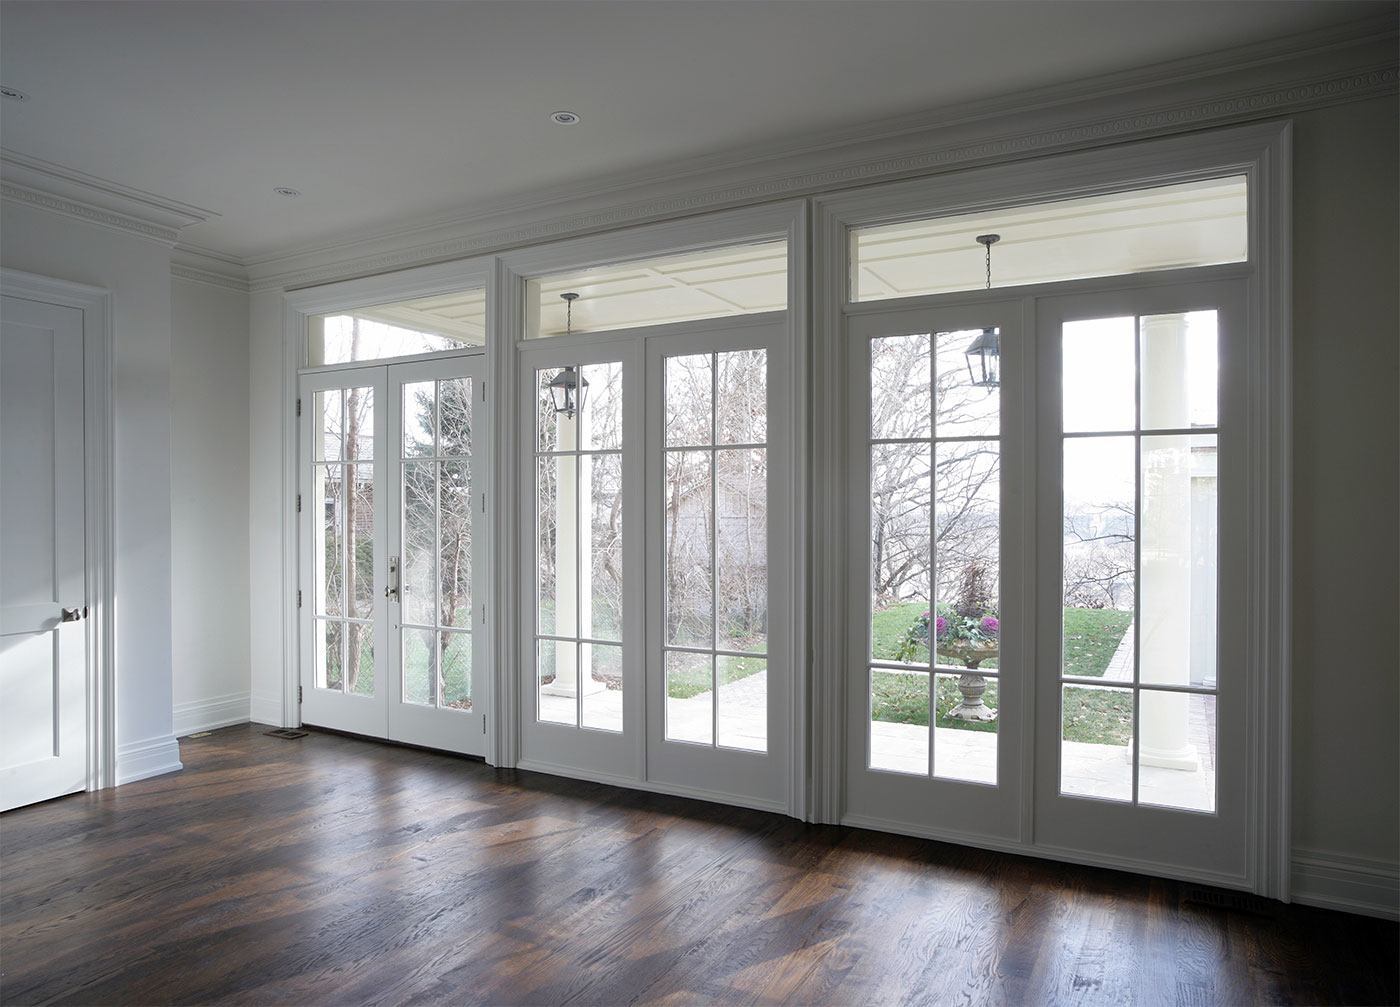 Residential house interior with modern style french doors